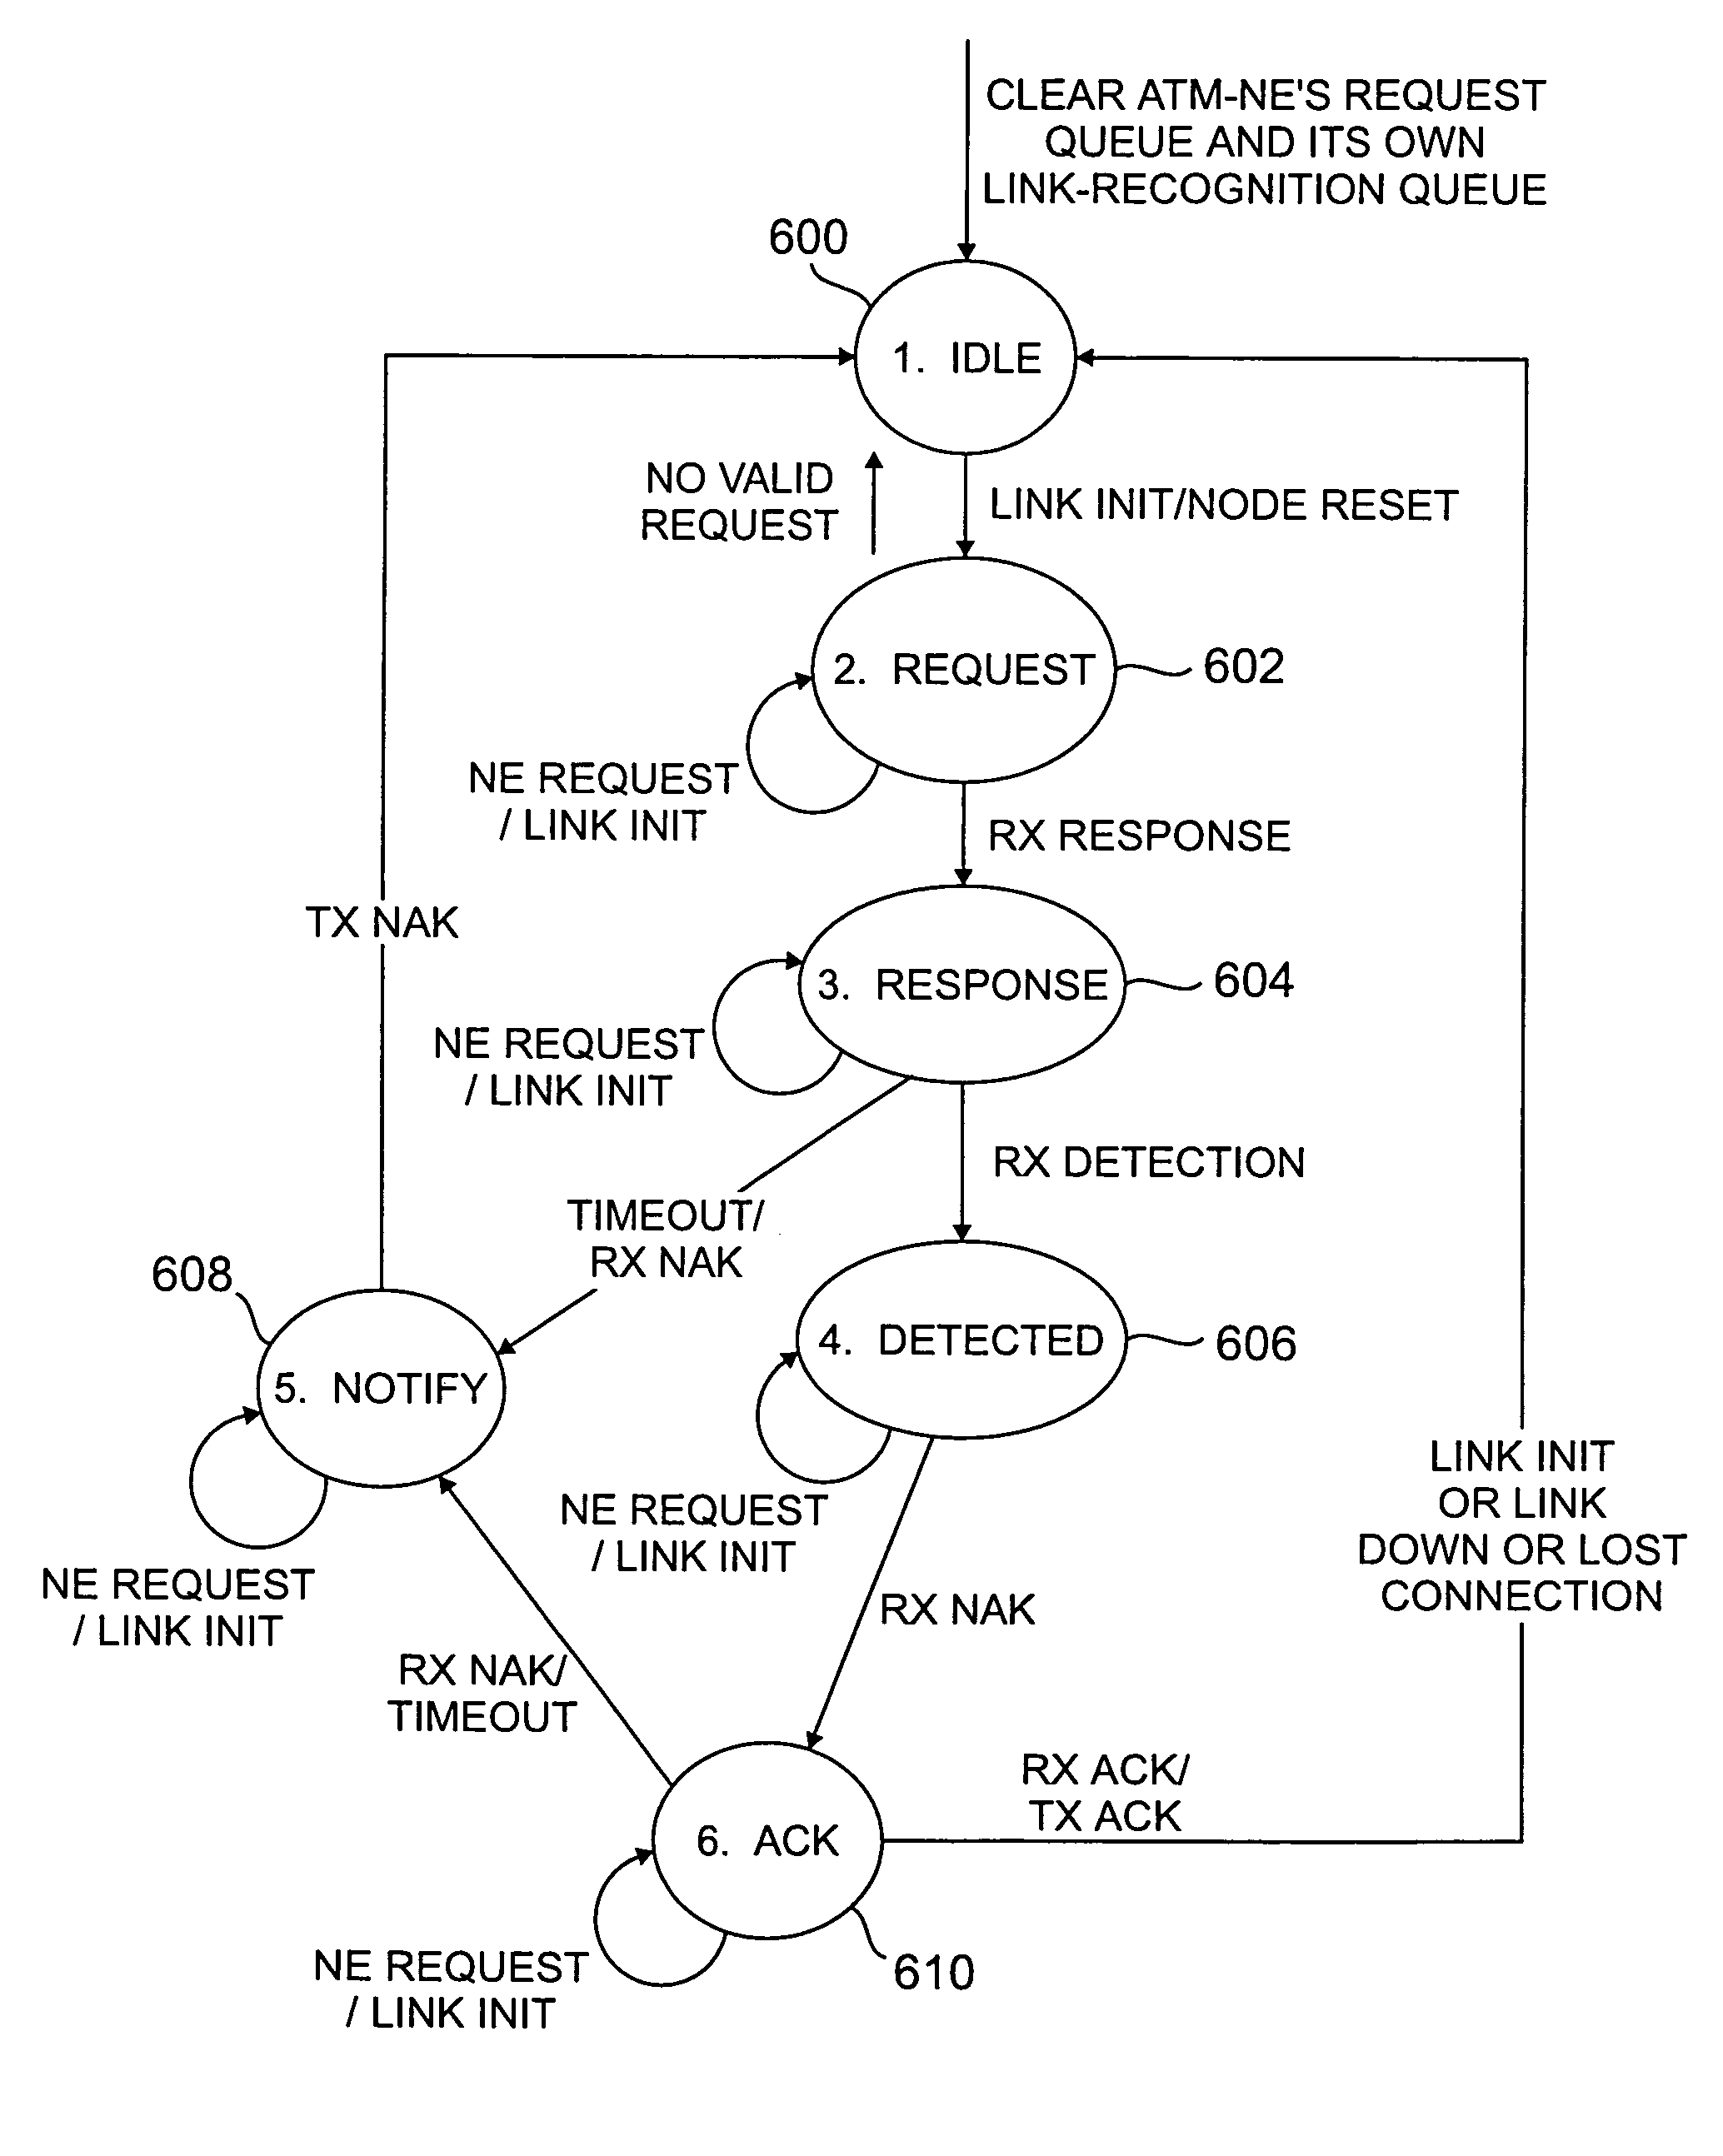 Apparatus and method for automatic port identity discovery in hierarchical heterogenous systems